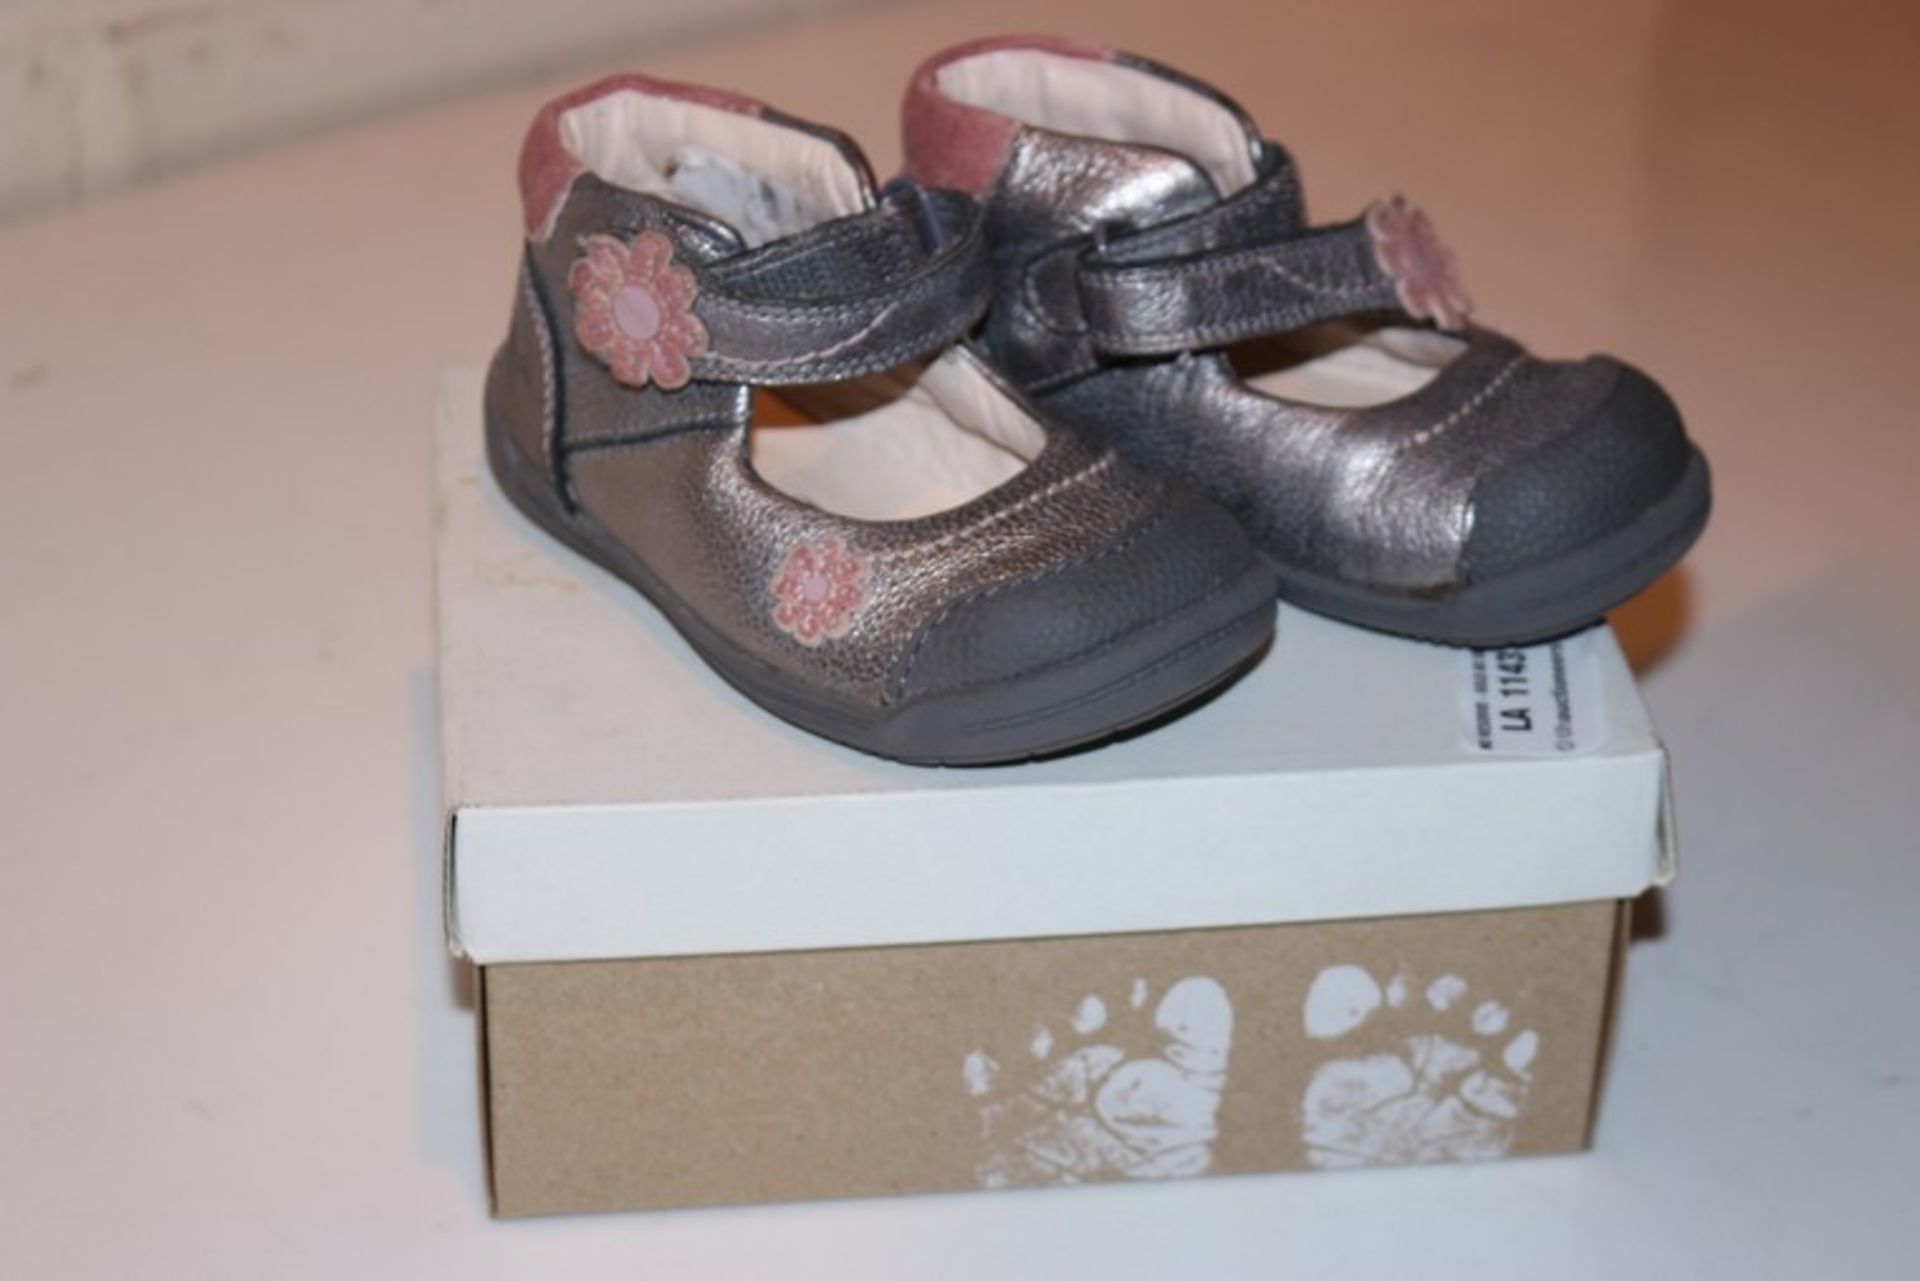 1 x BOXED PAIR OF CLARKS SOFTLY FIZZ SIZE 4G SOFT SHOE (27.1.17) *PLEASE NOTE THAT THE BID PRICE